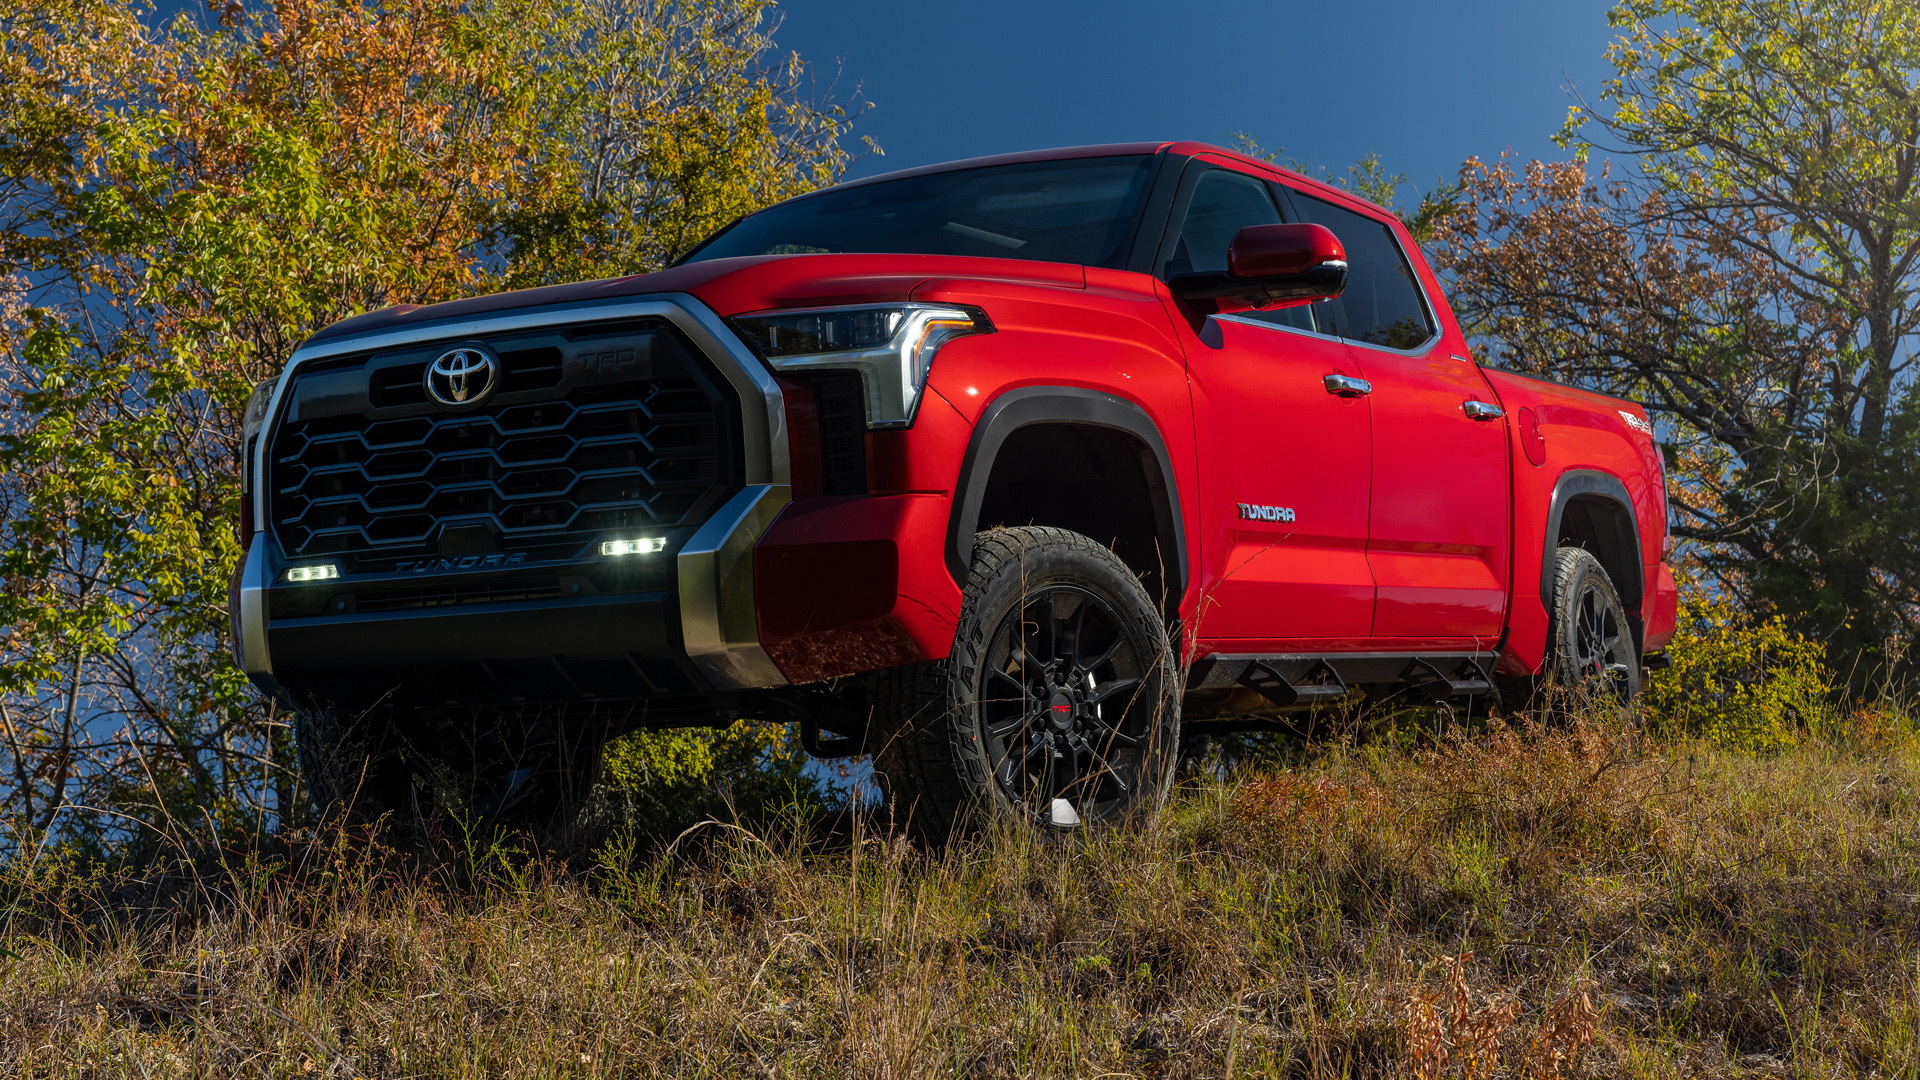 Toyota Tundra equipped with TRD 3-inch lift kit